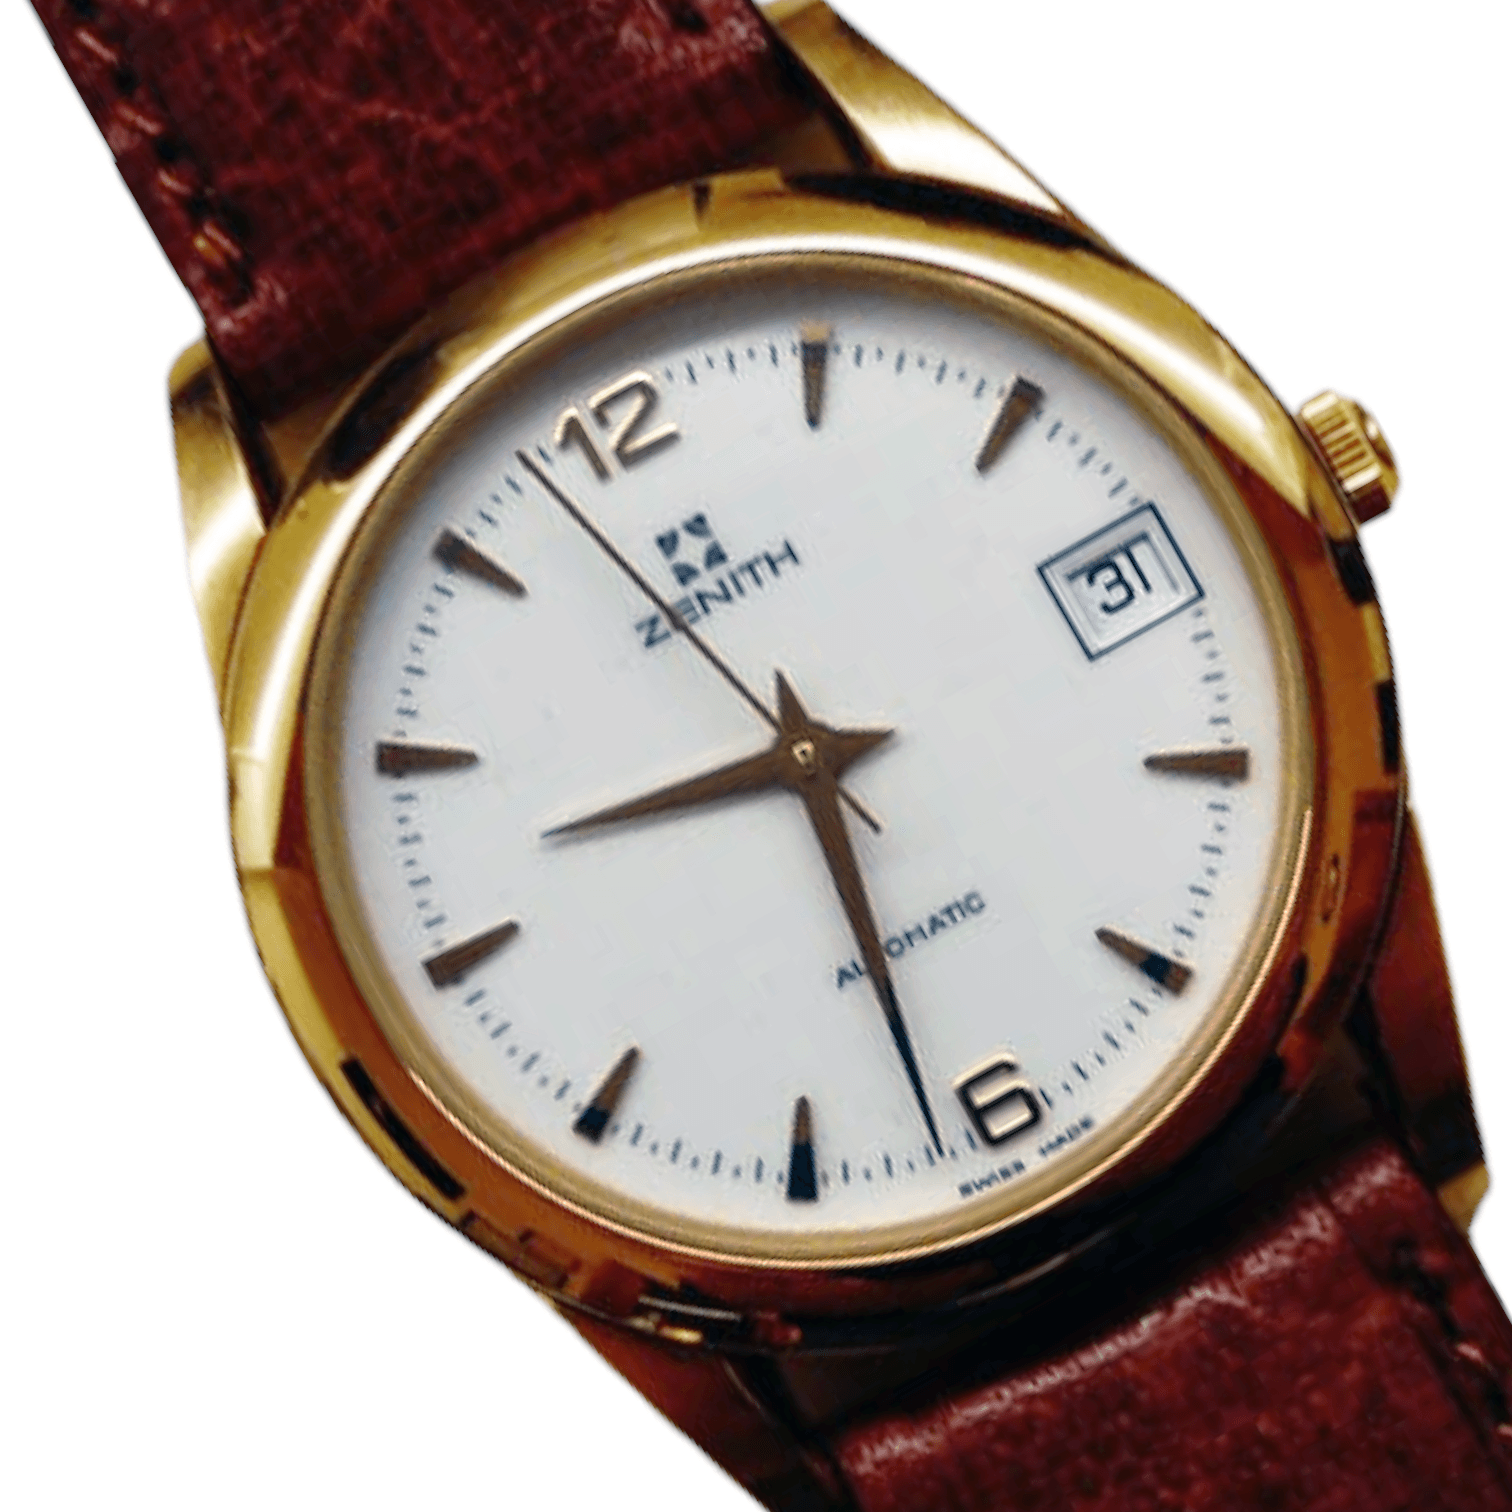 Zenith Automatic Date Laminated gold Ref. 27.1000.462 - ON6028 - LuxuryInStock